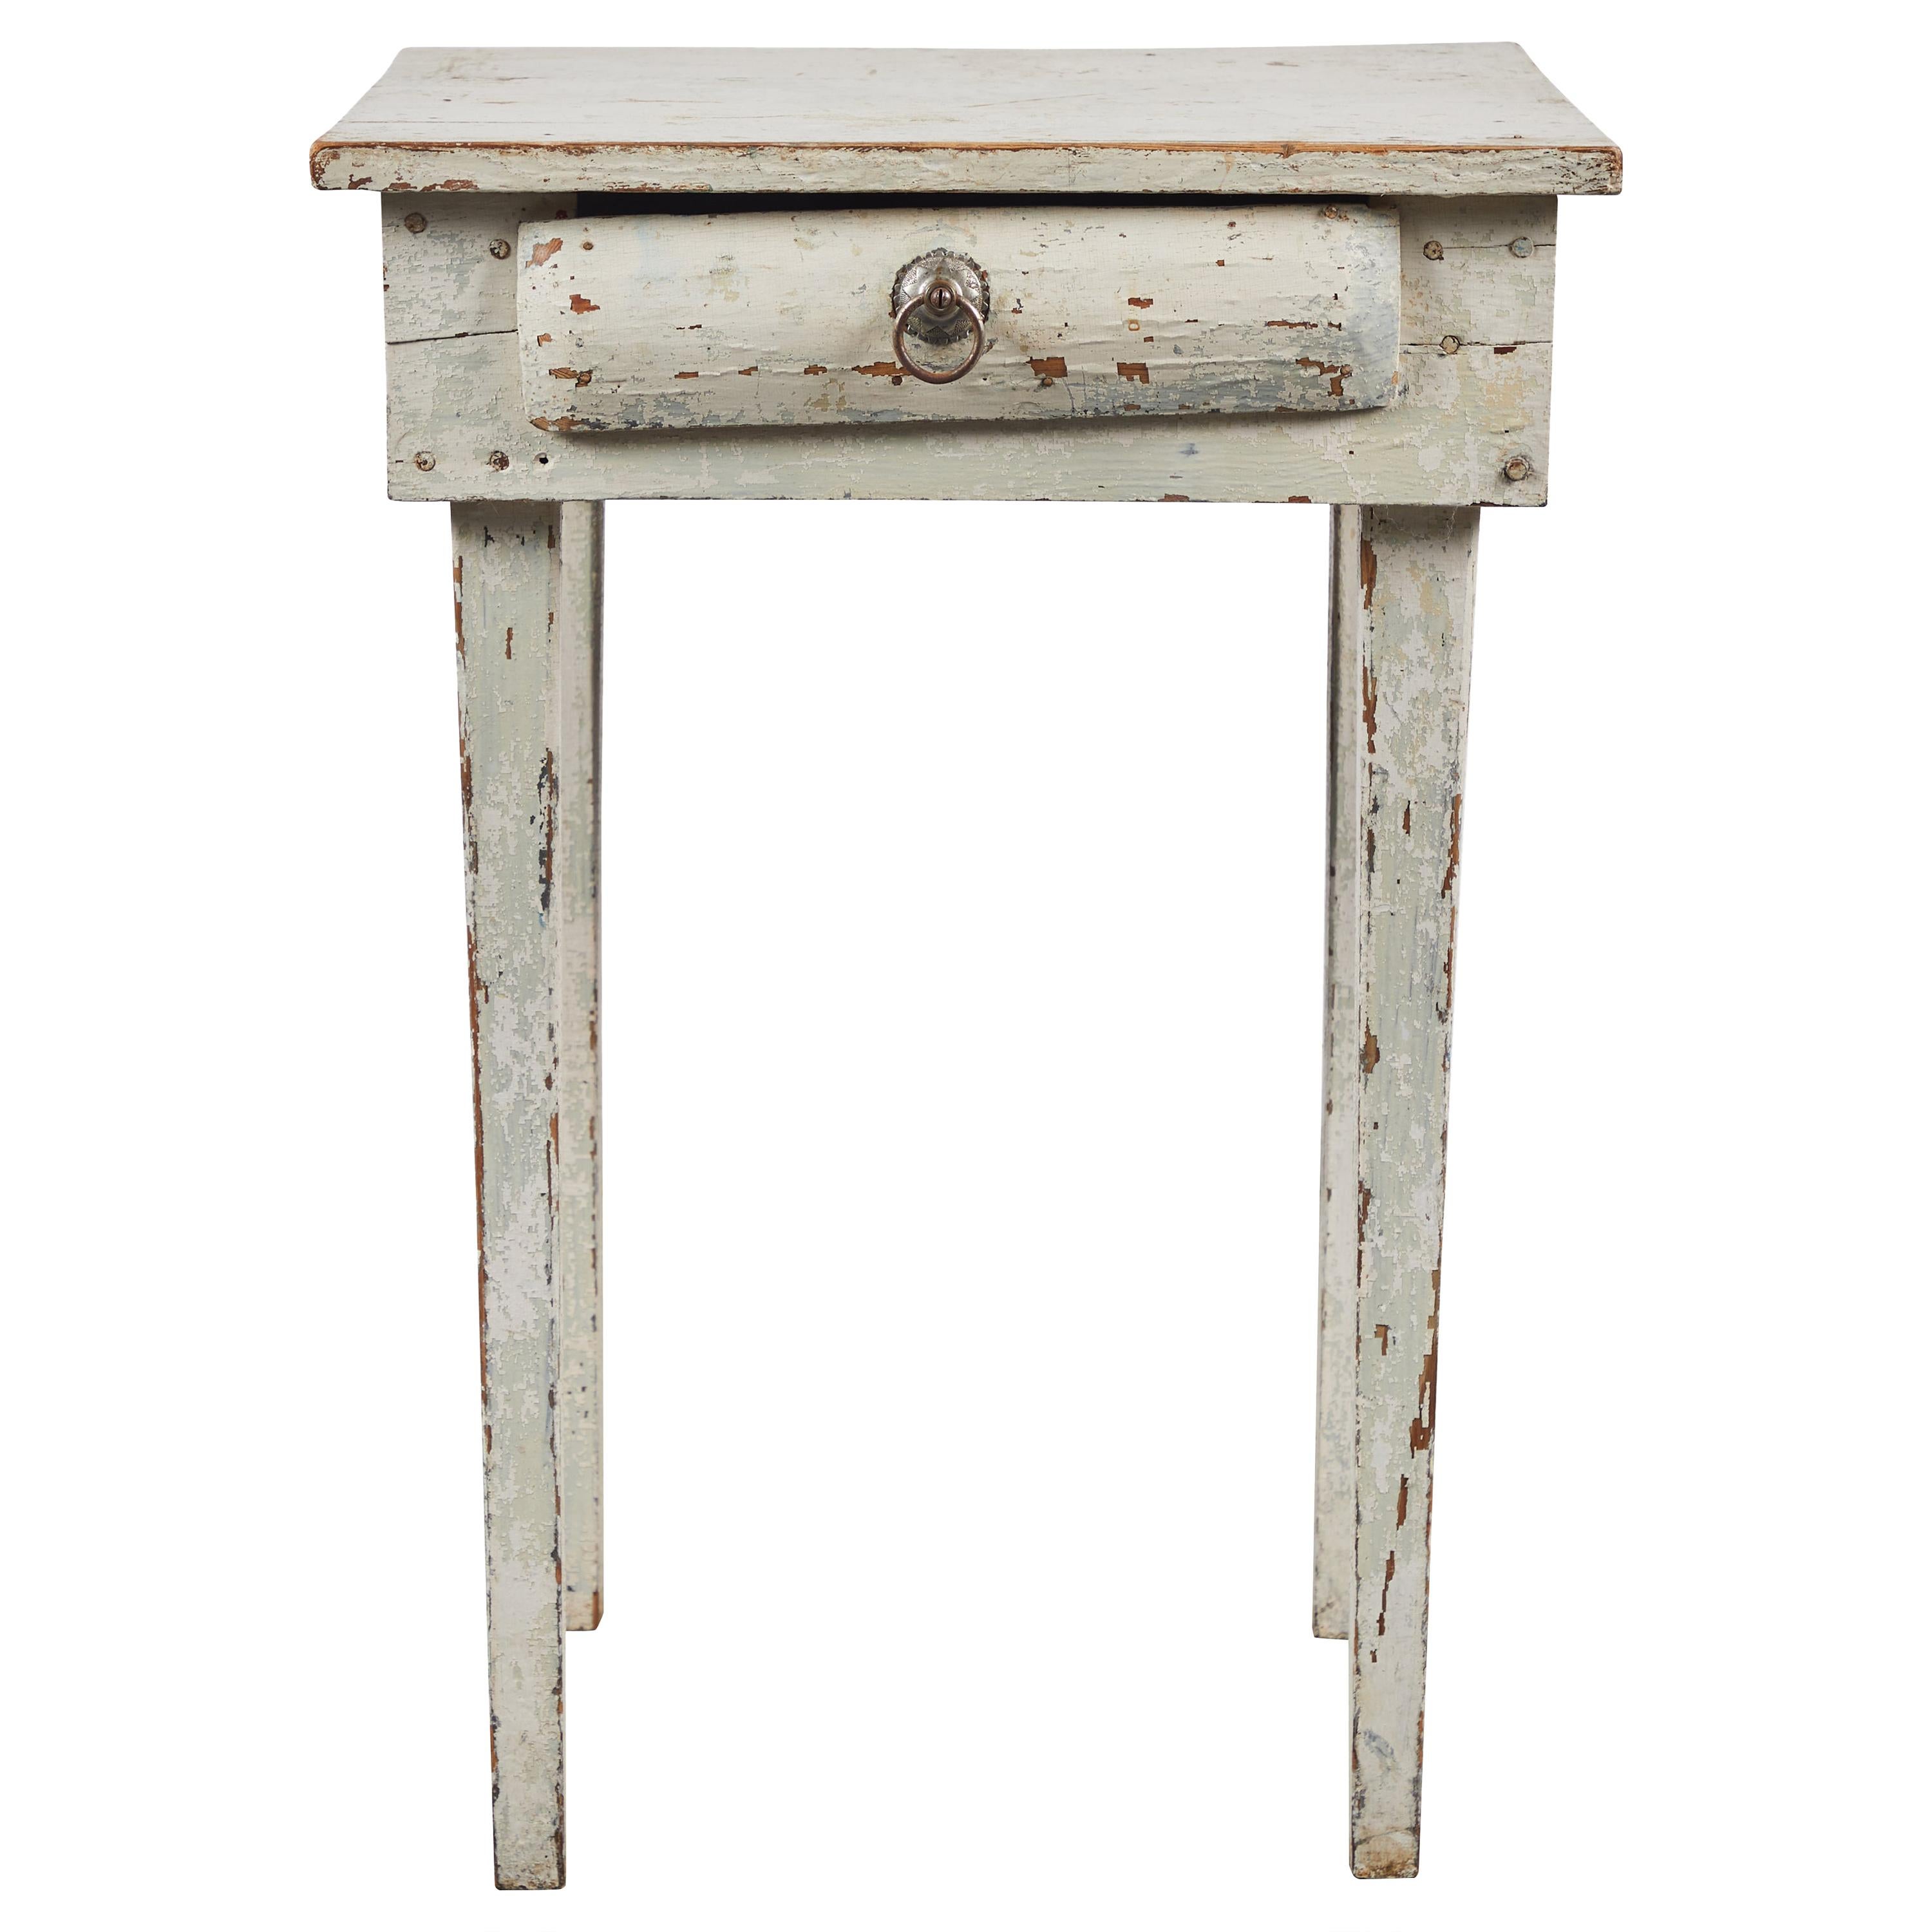 Early American Rustic White Painted Side Table